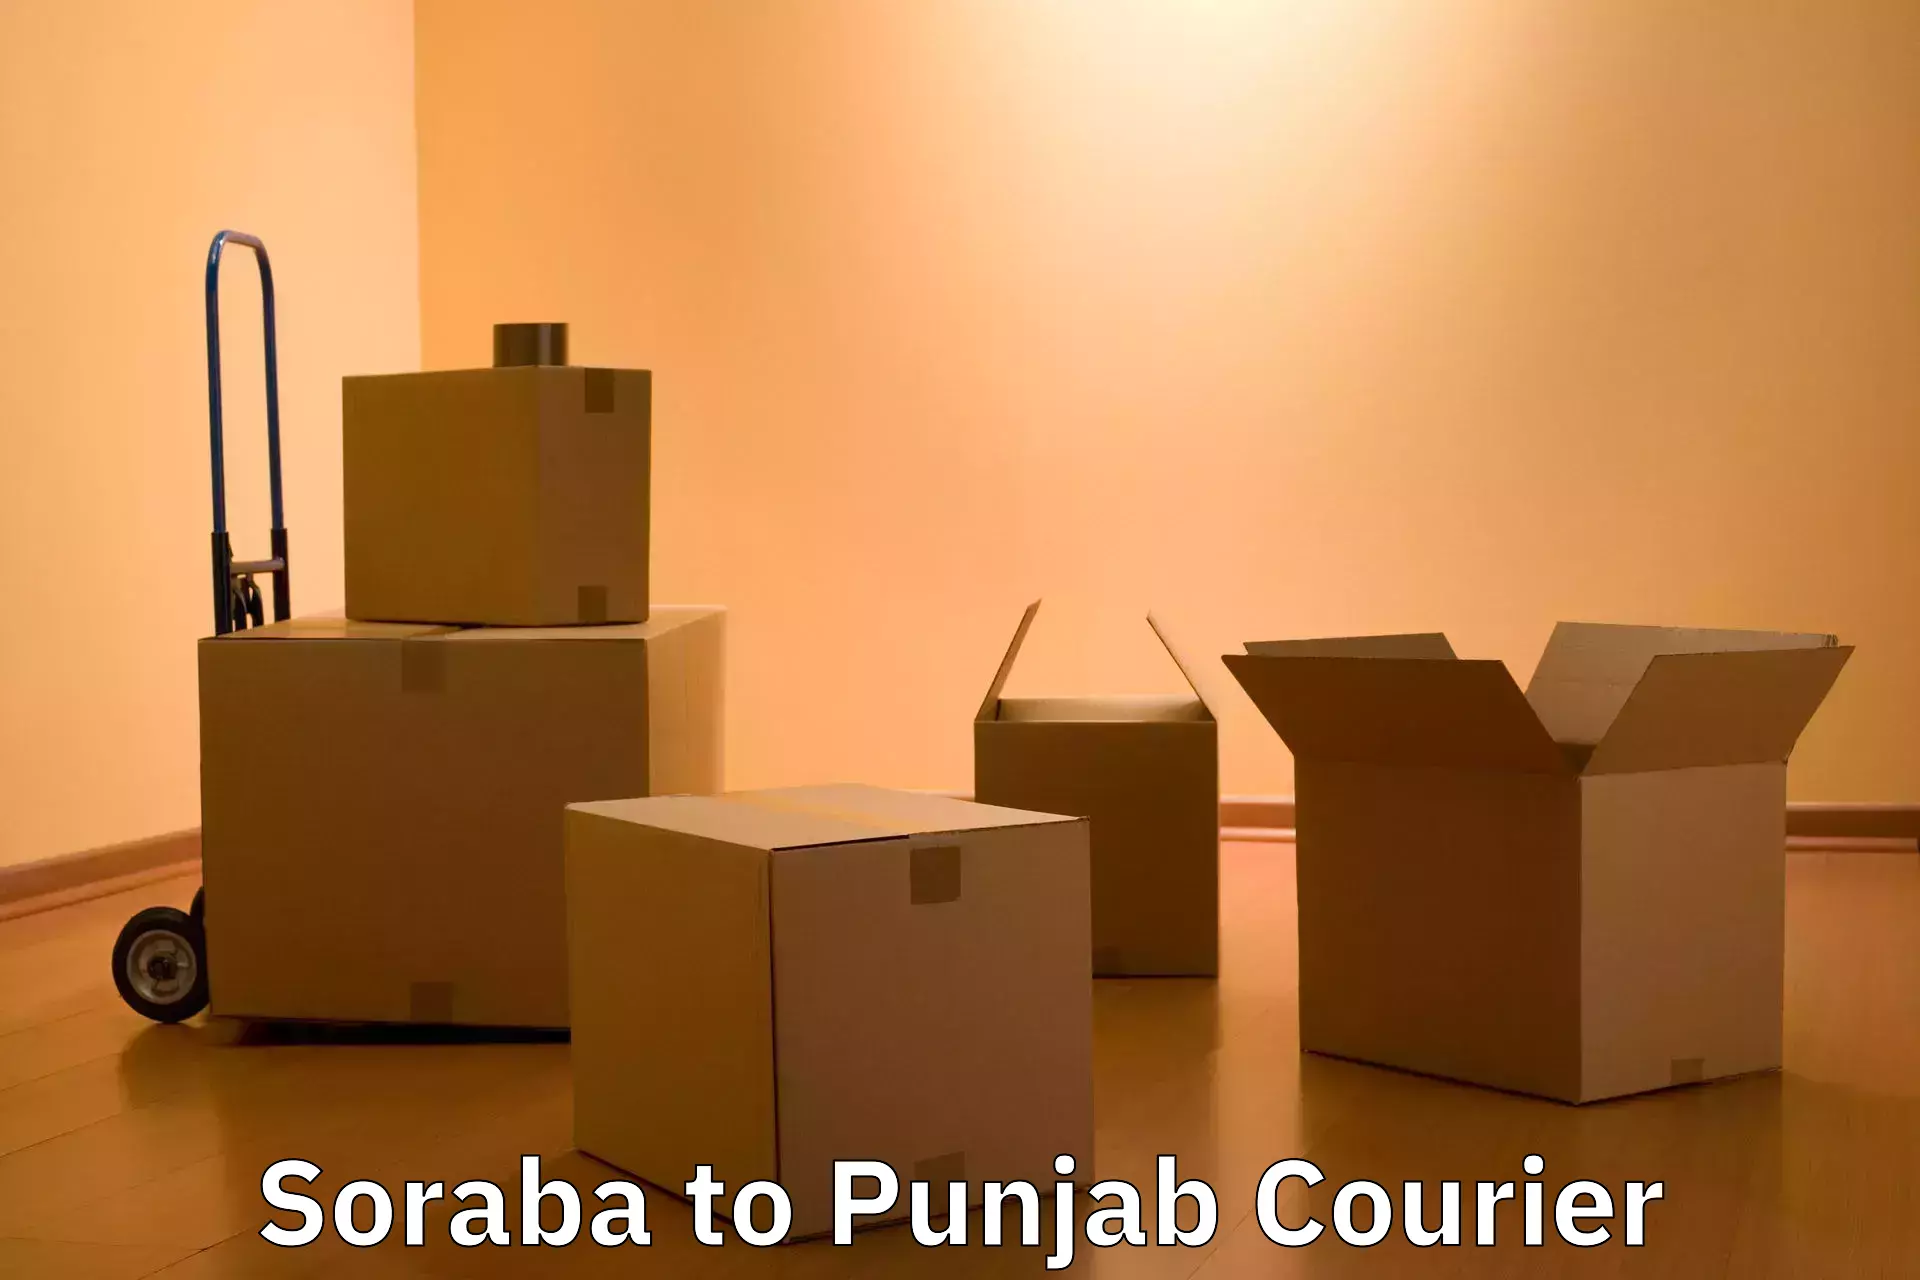 Luggage delivery system Soraba to Punjab